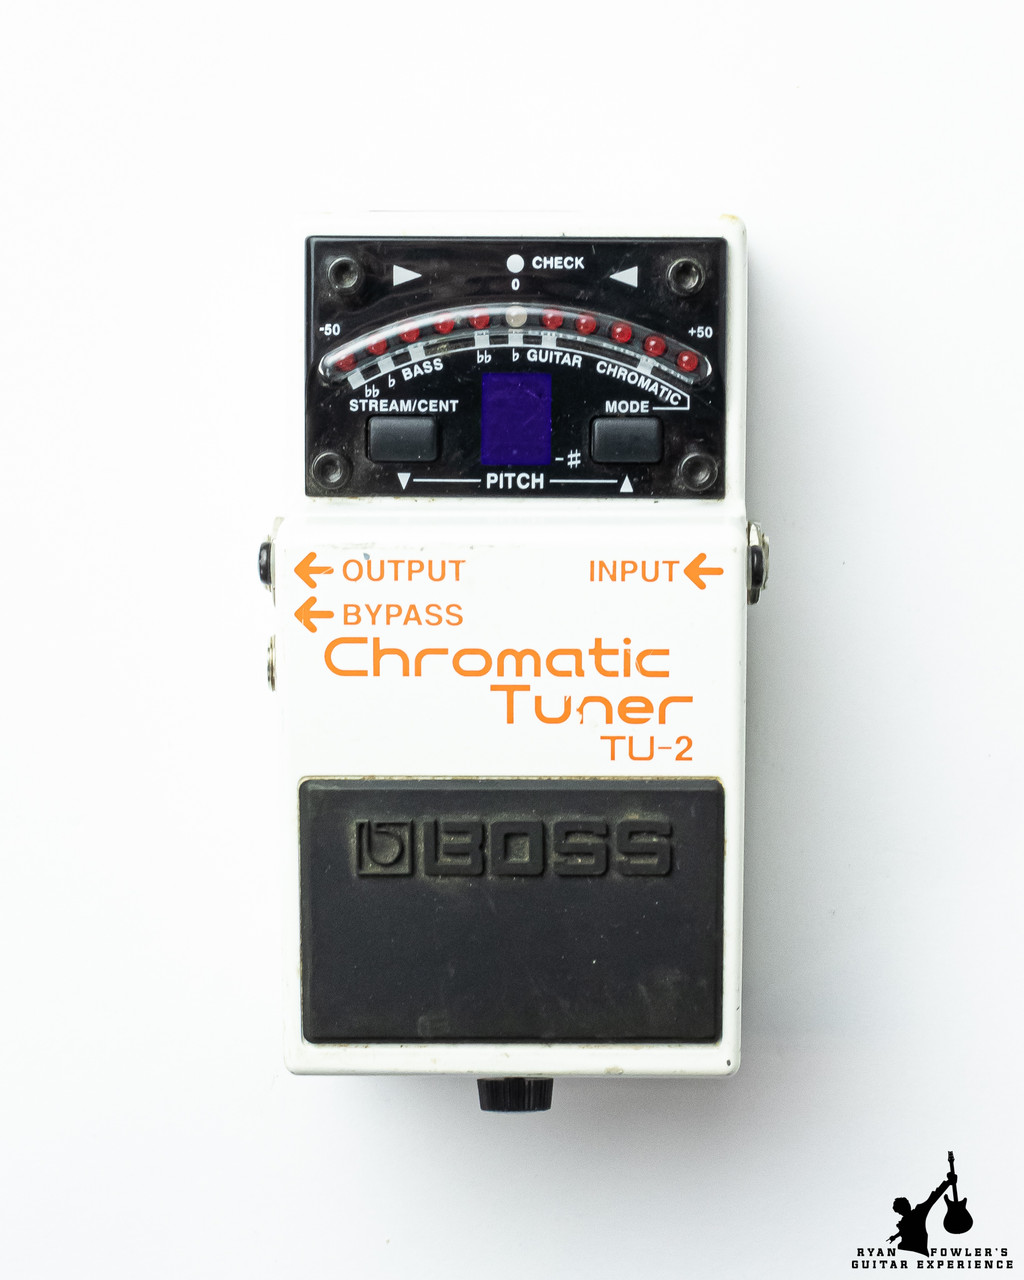 by modtagende Arena Boss TU-2 Chromatic-Tuner Pedal - Ryan Fowler's Guitar Experience